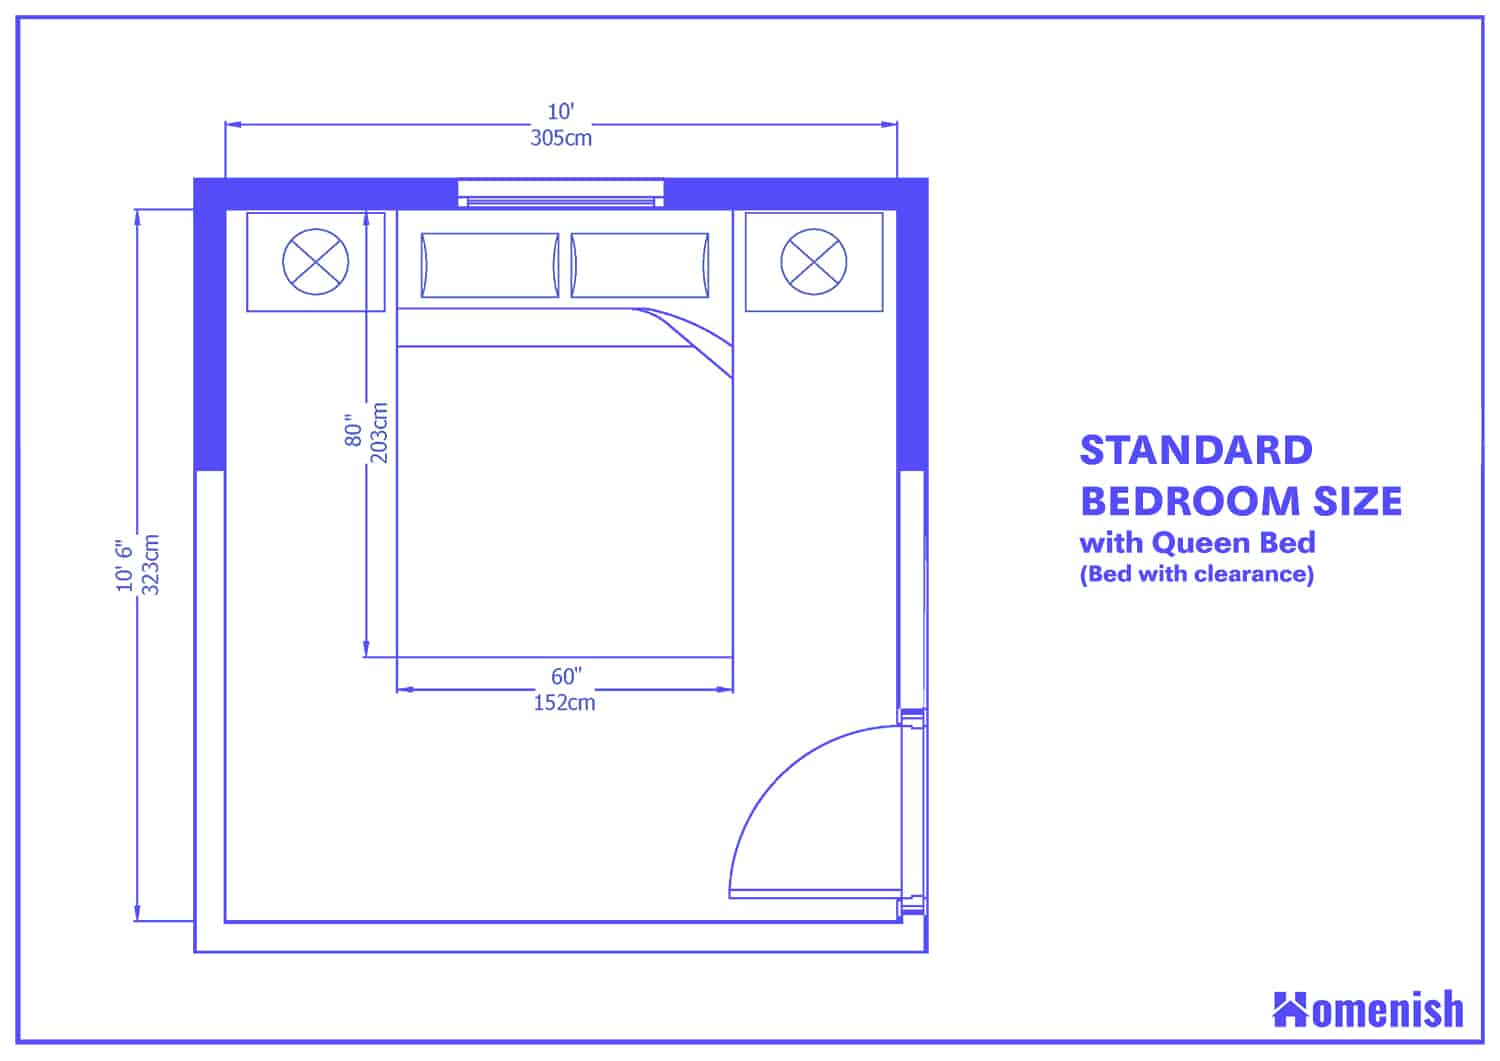 Average Bedroom Size And Layout Guide, Typical Size Of King Bed